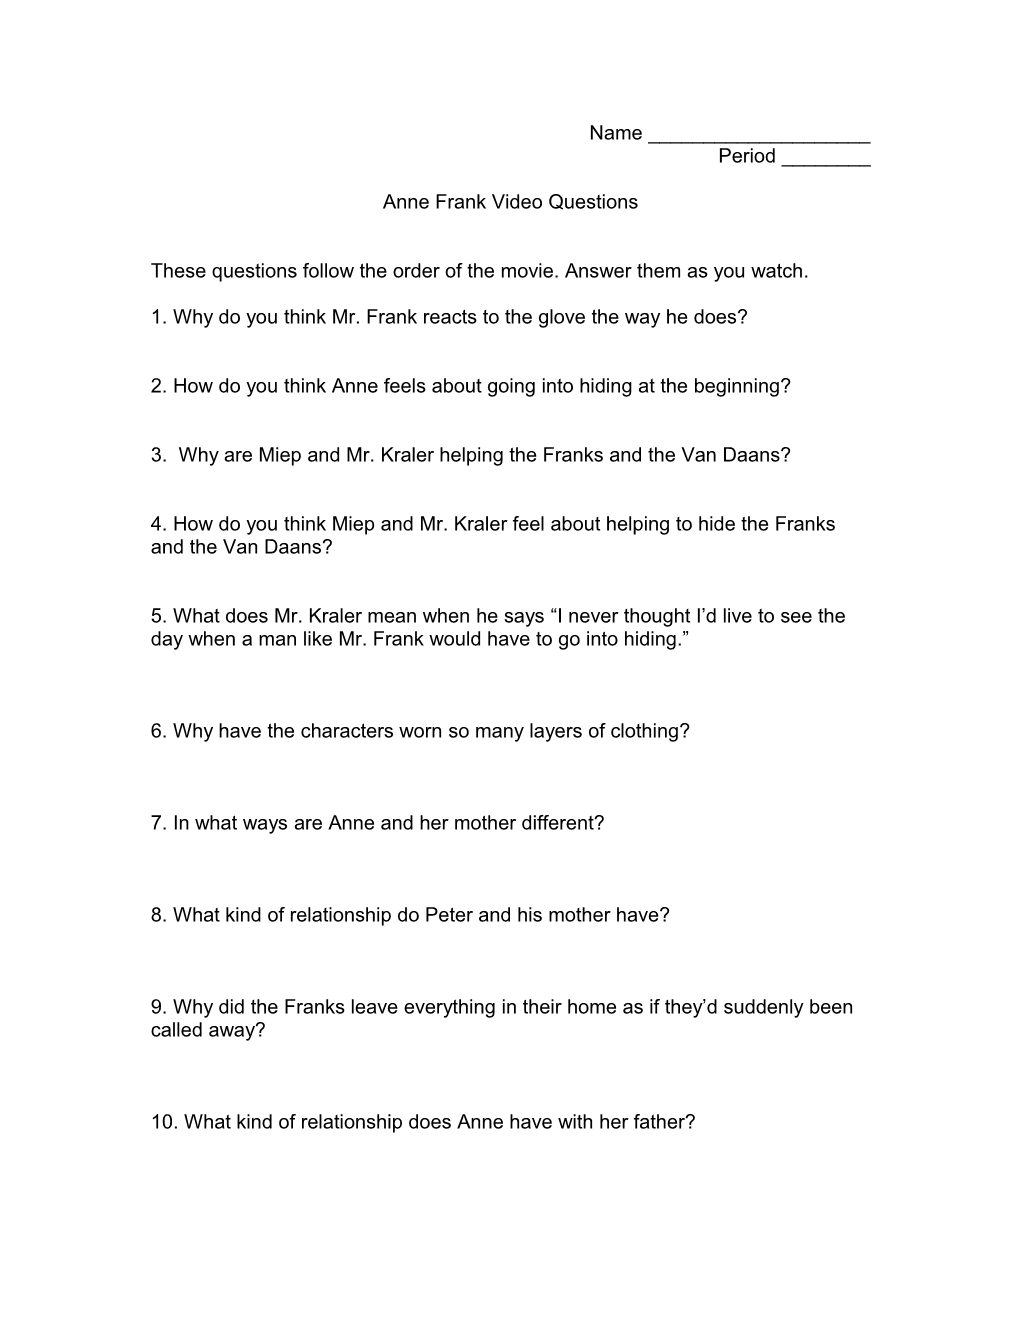 Anne Frank Video Questions